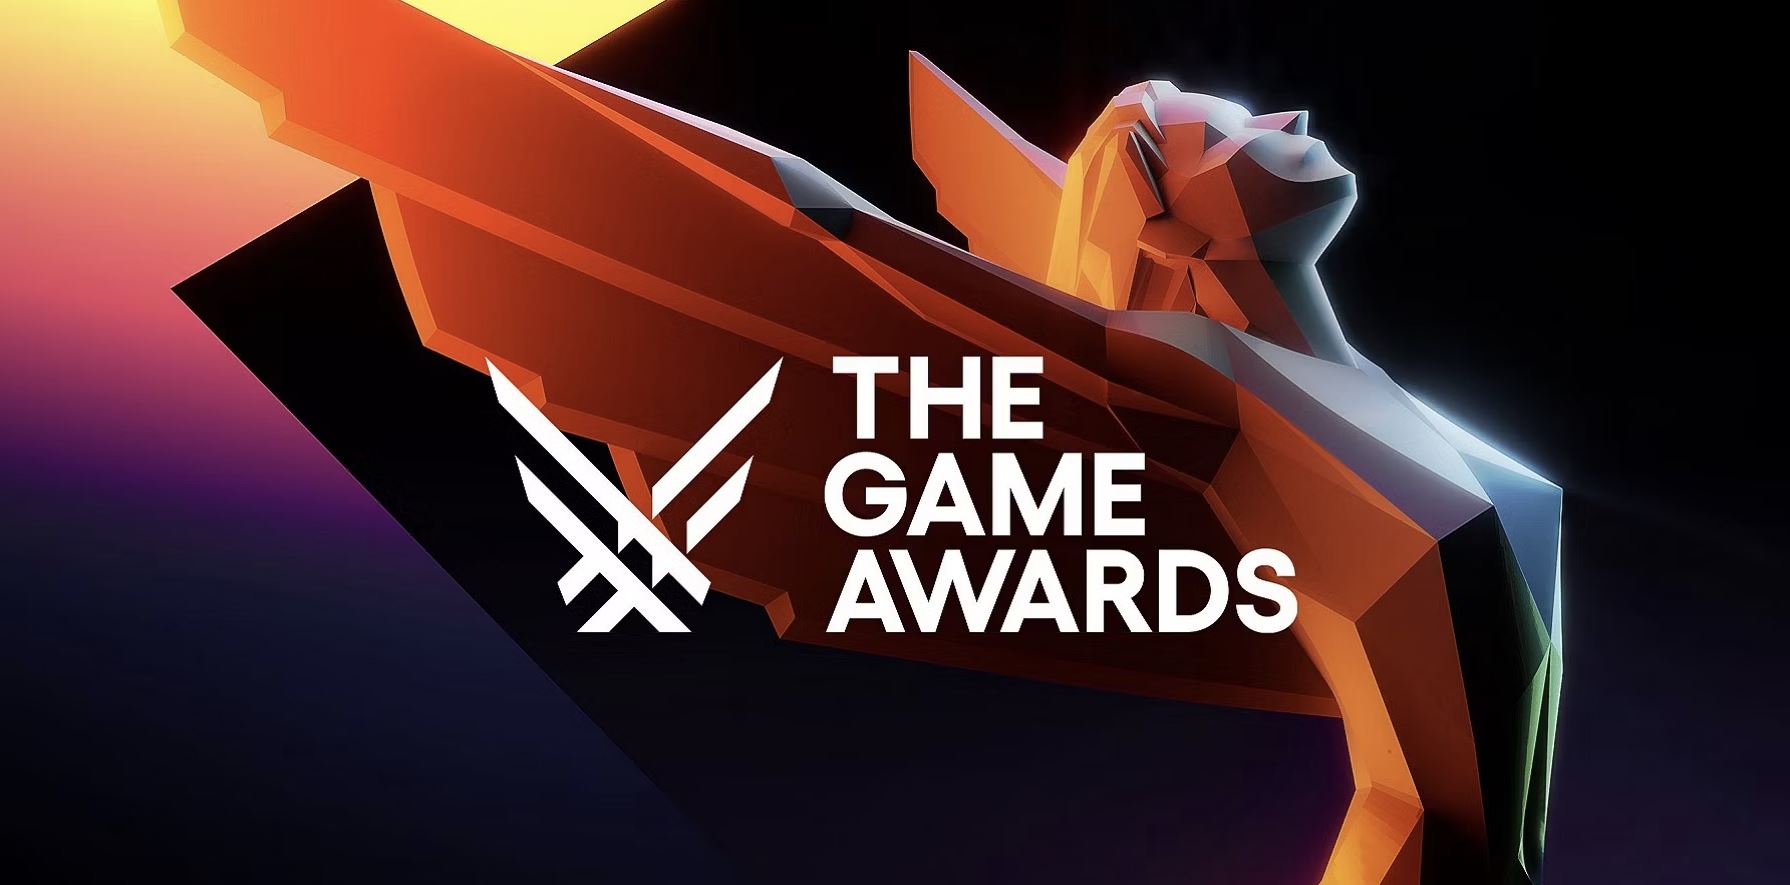 The Game Awards 2020: the 6 candidates for Game of the Year (GOTY) winner -  Video Games Guides, News, Reviews, Gameplay, Latest Updates